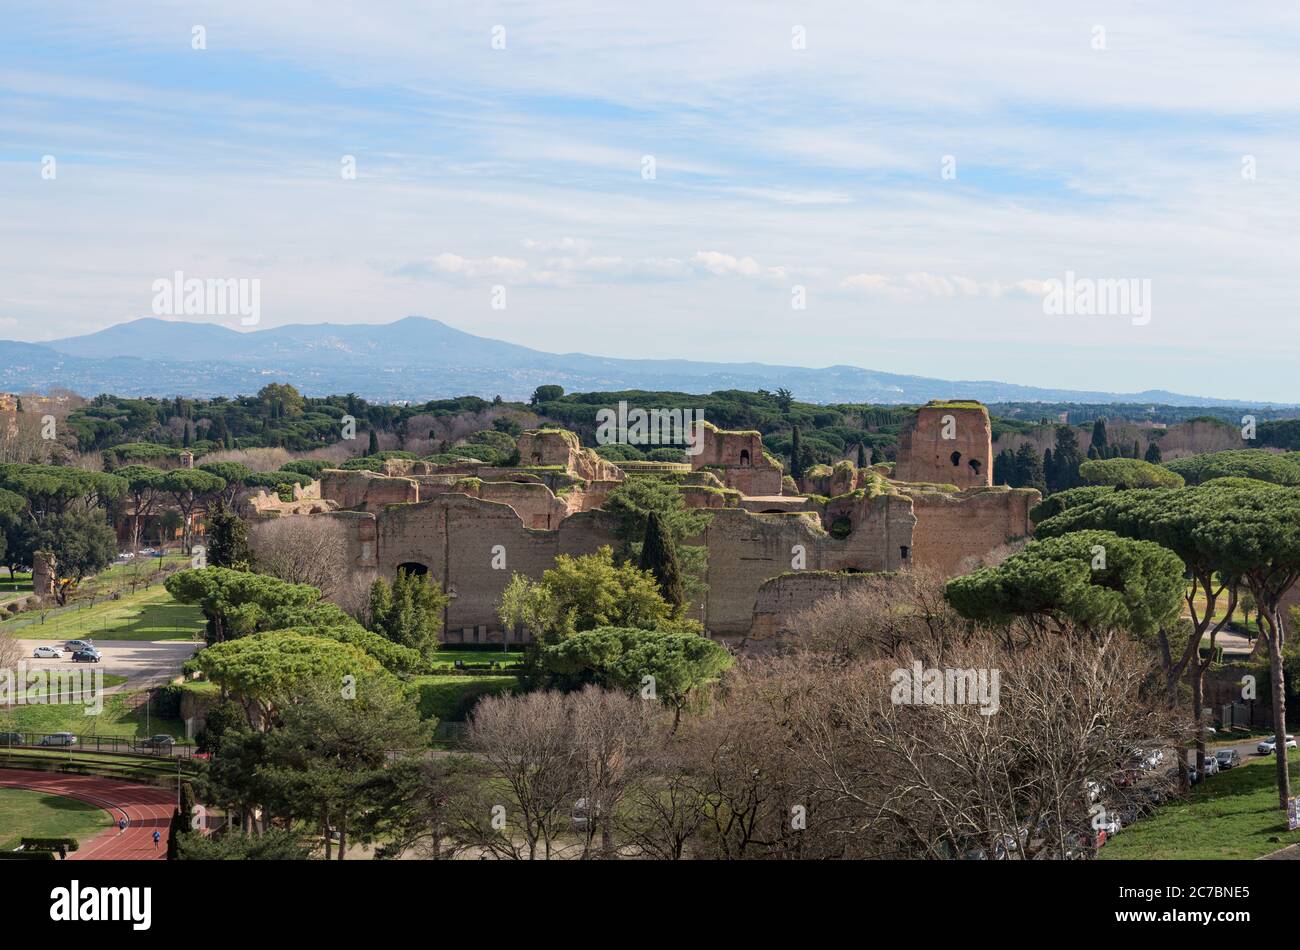 Ruins of ancient Roman Baths of Caracalla, a thermal complex next to Circo Massimo in Rome, Italy, seen from the FAO building terrace Stock Photo